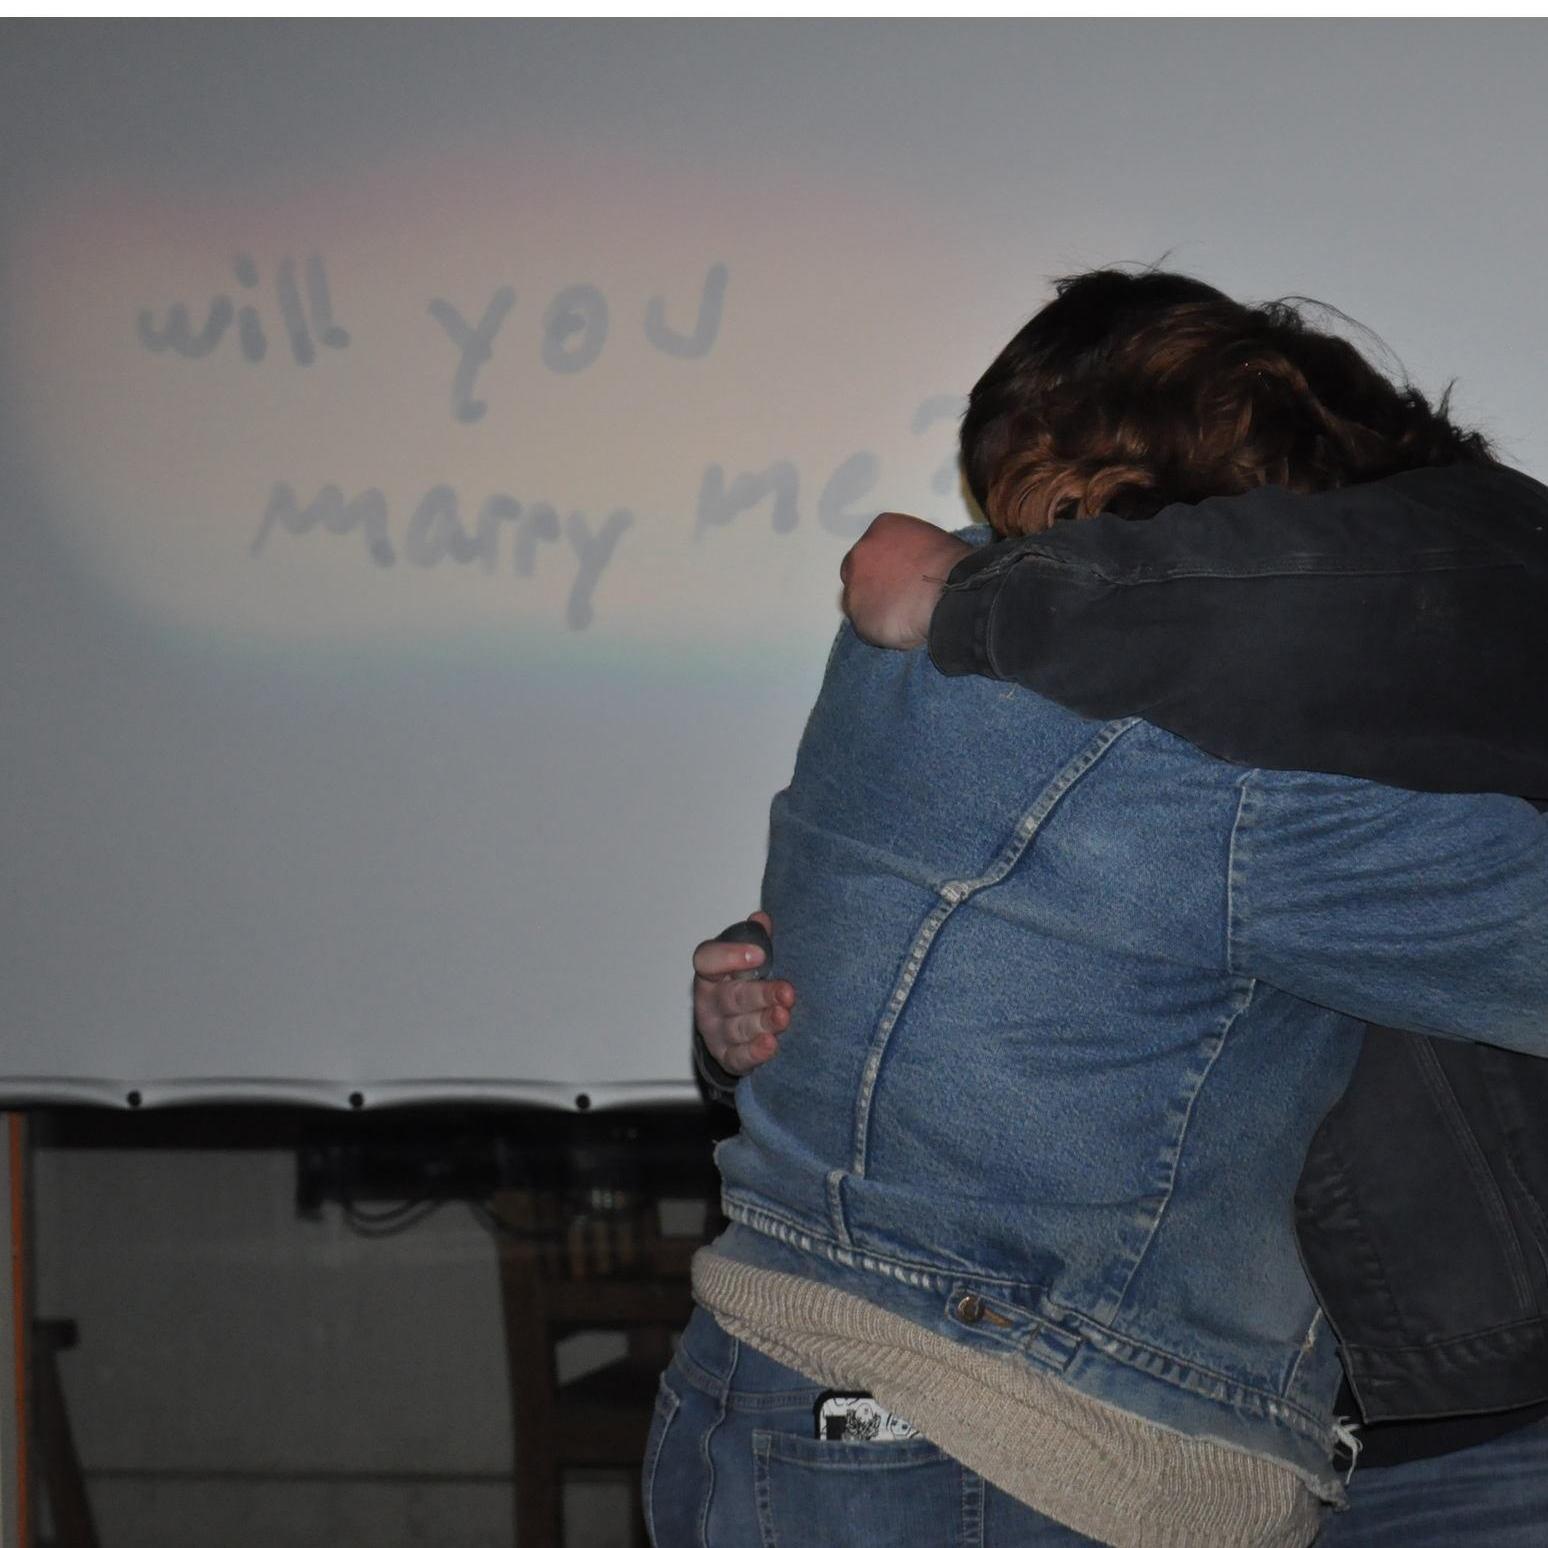 Quentin proposed to Maryellen in January of 2021. They used a vintage slide projector and gathered family for the special event. It began to snow just after Quentin got down on one knee